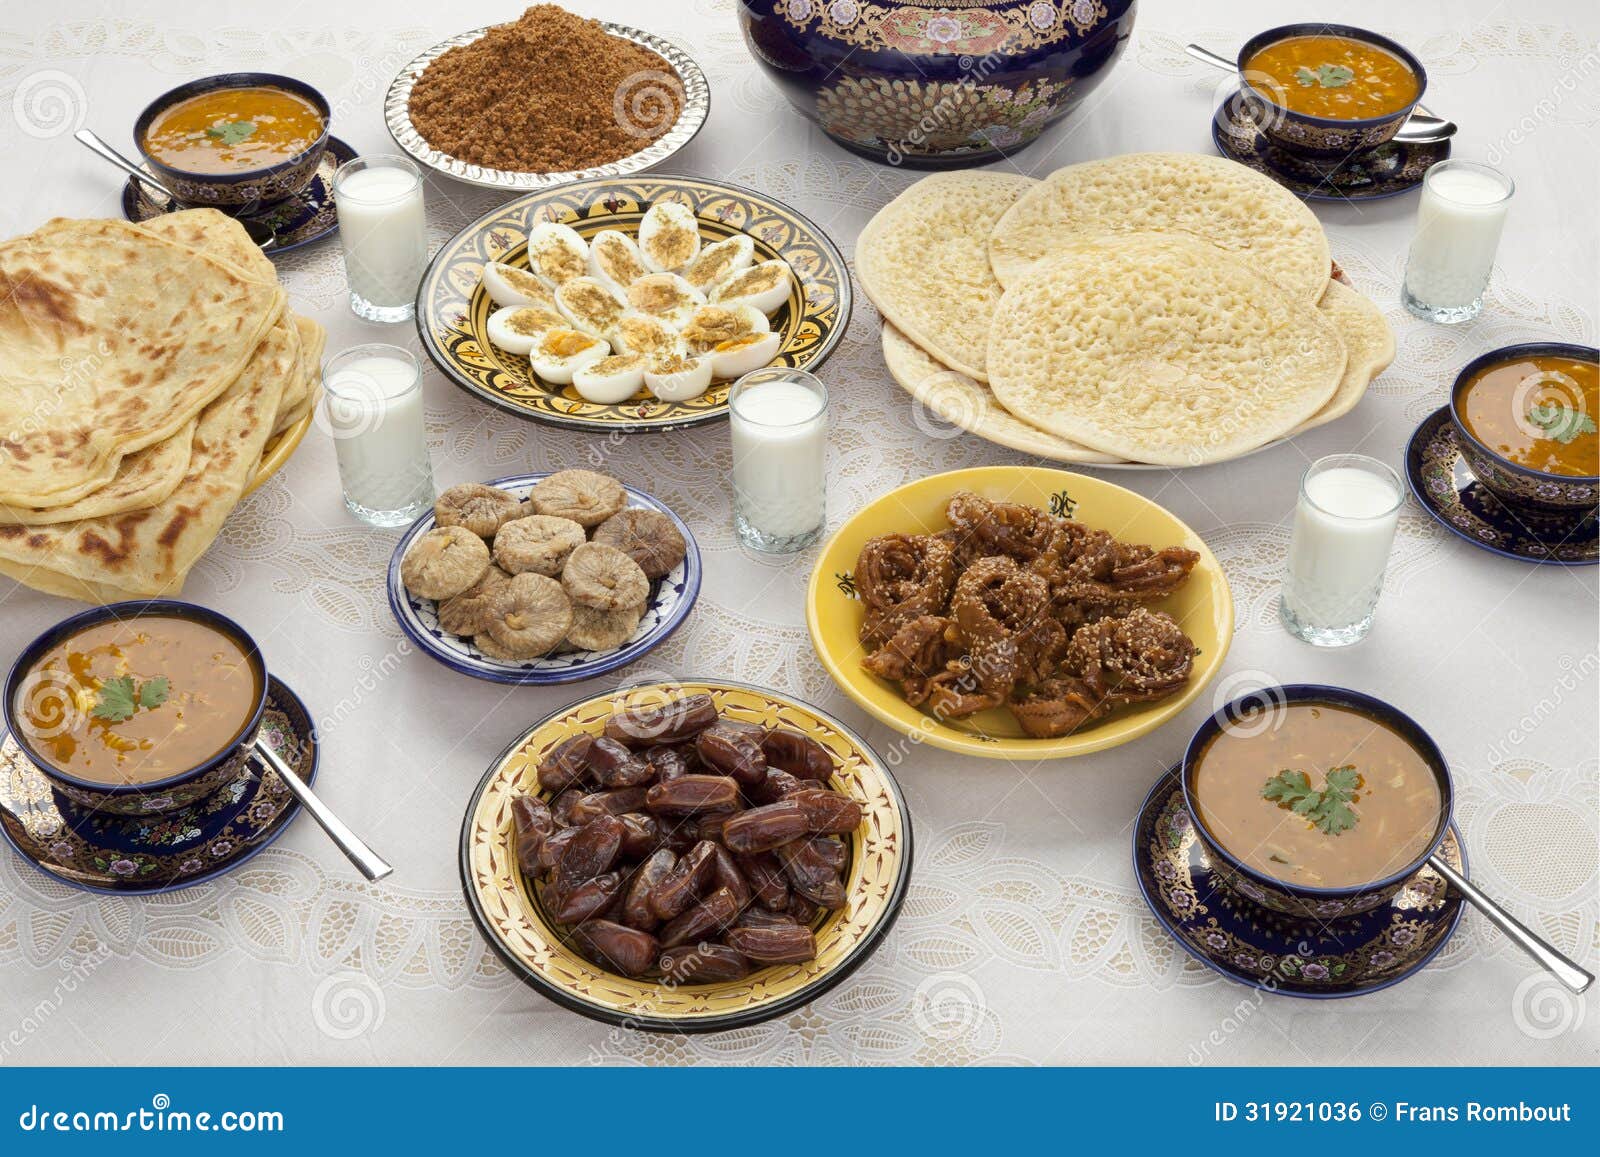 Traditional Moroccan Meal For Iftar In Ramadan Stock Photo Image